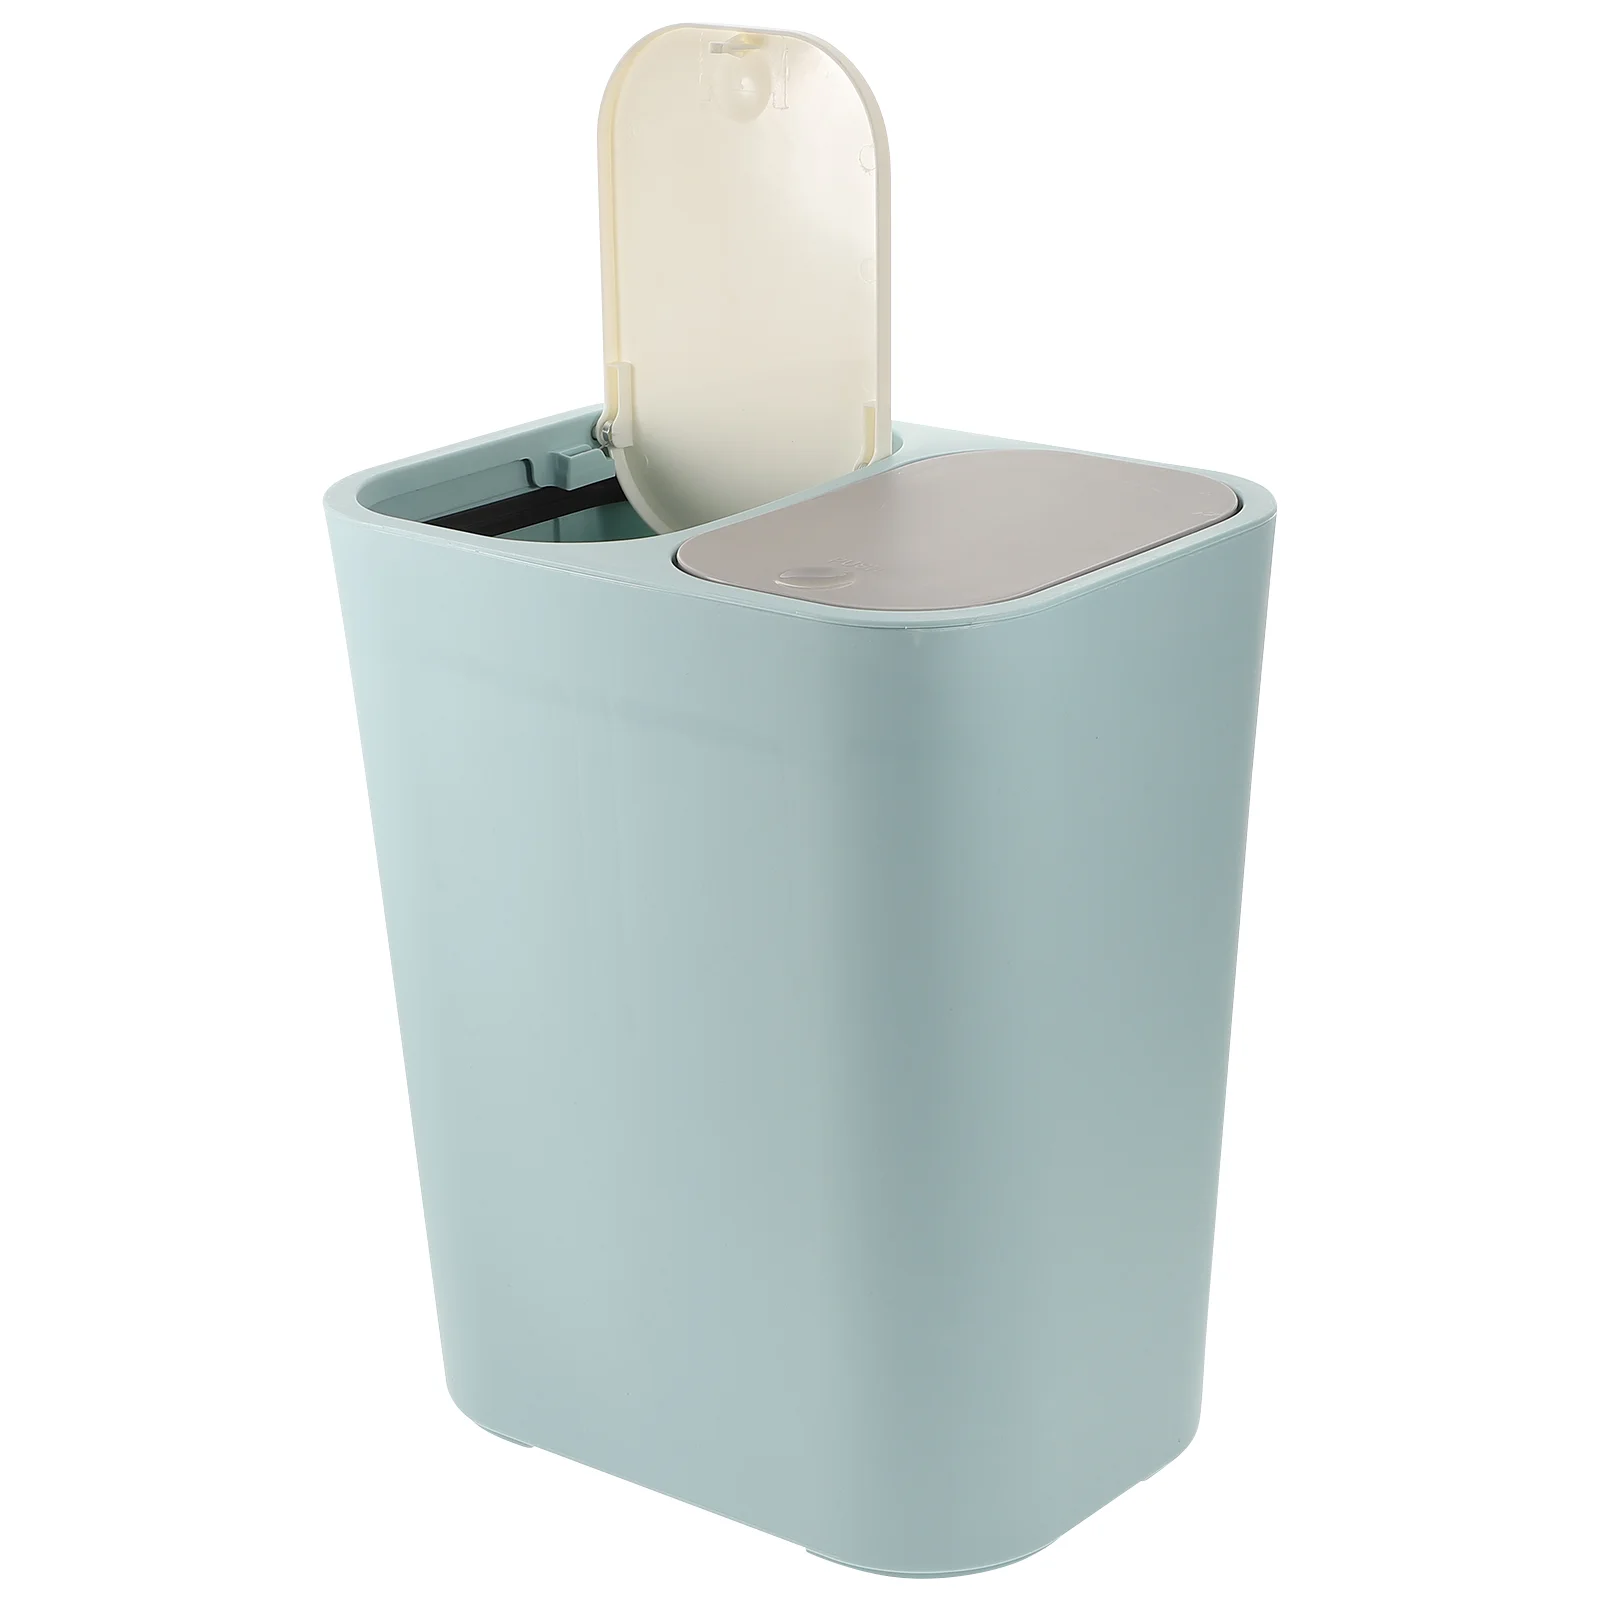 

Dual Trash Can Lid Dual Compartment Garbage Can Classified Recycling Bin Rectangular Trash Containers Waste Bin Kitchen